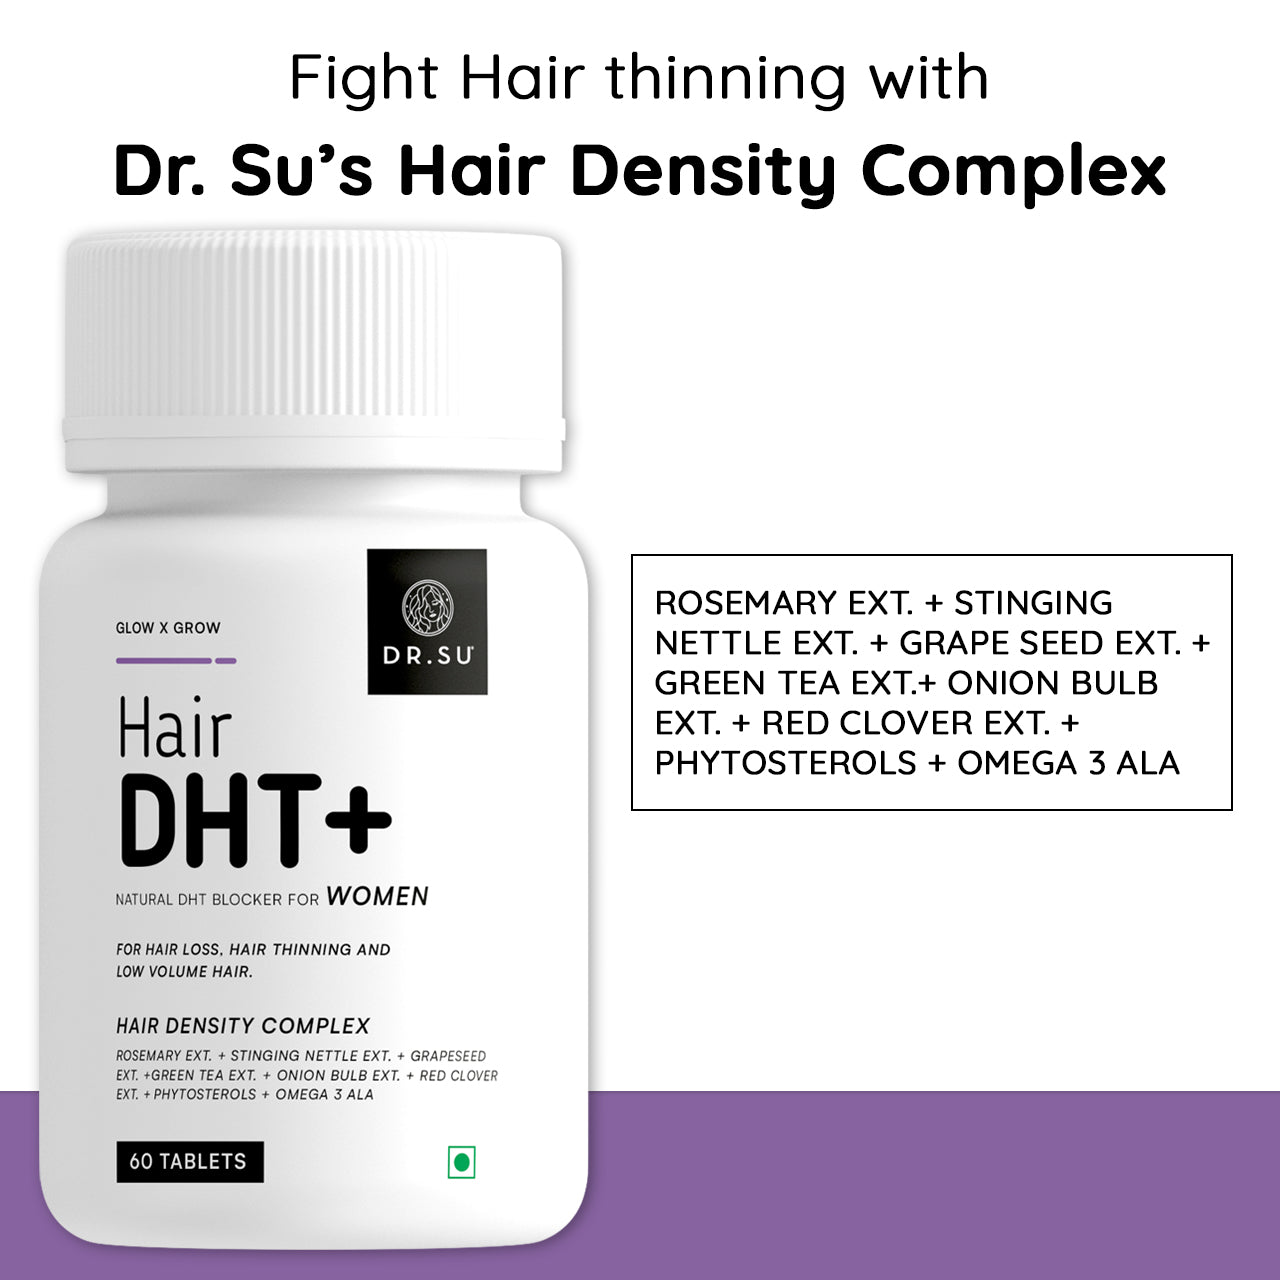 Dr. Su HairDHT+ (Women) for Hair Thinning and Hair Loss